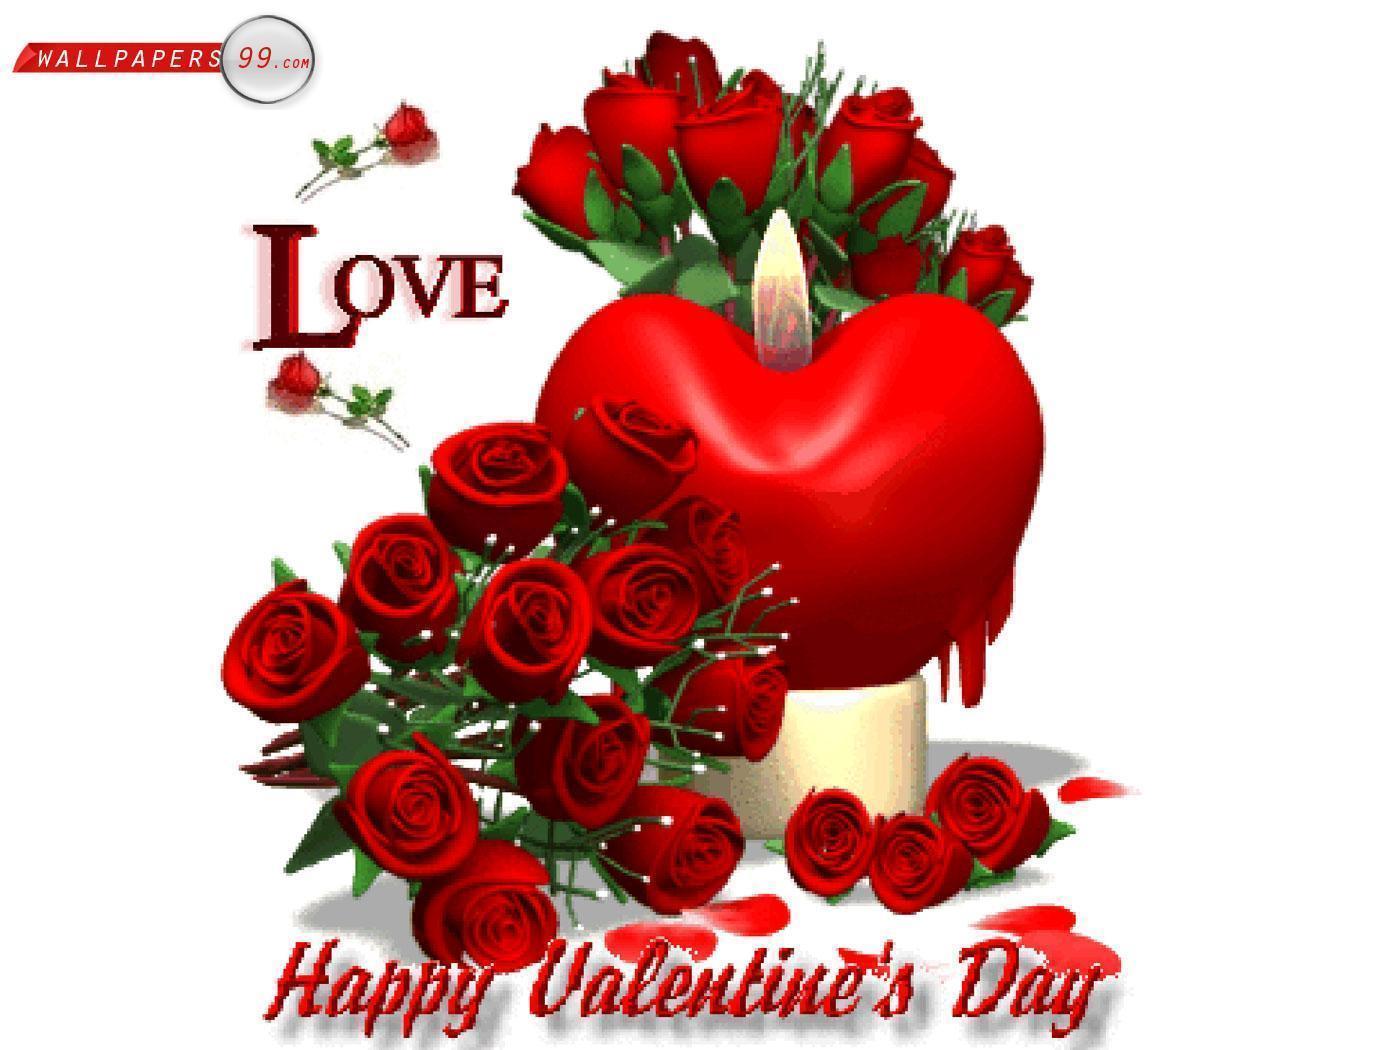 Happy Valentines Day Wallpaper 10867 HD Wallpaper in Celebrations